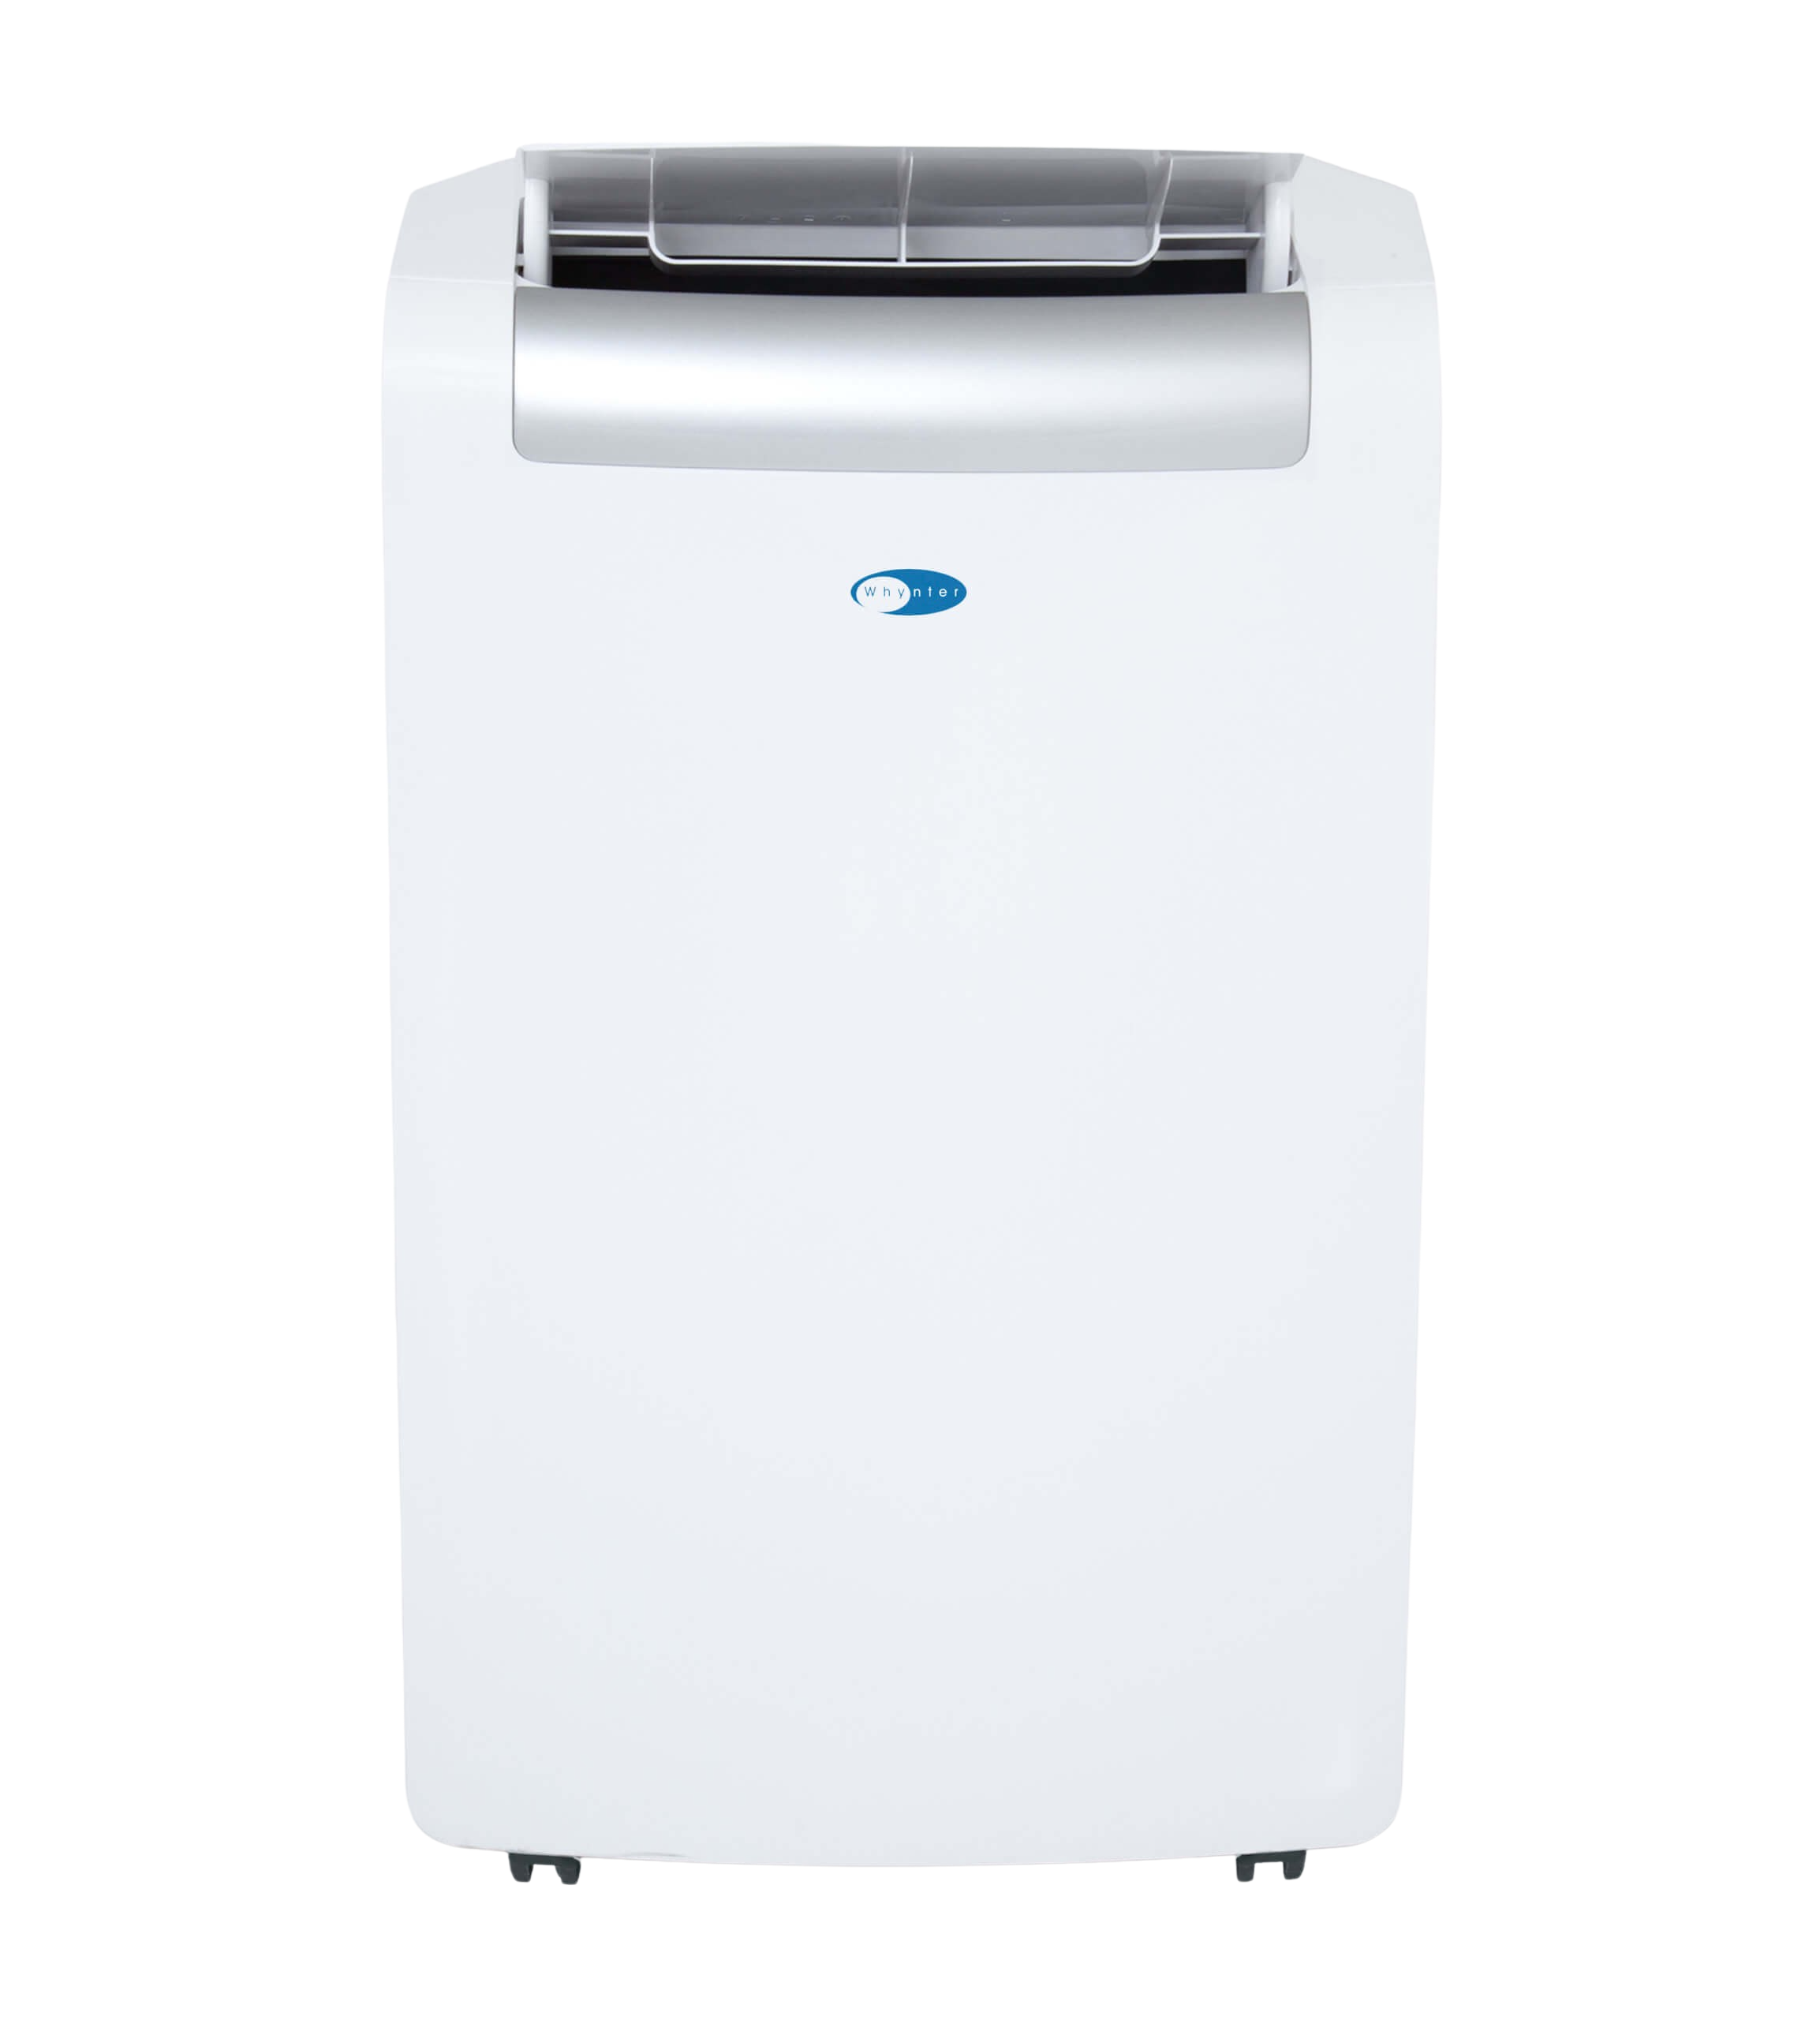 Whynter, Whynter ARC-148MS 14,000 BTU Portable Air Conditioner with Dehumidifier and Silvershield Filter New